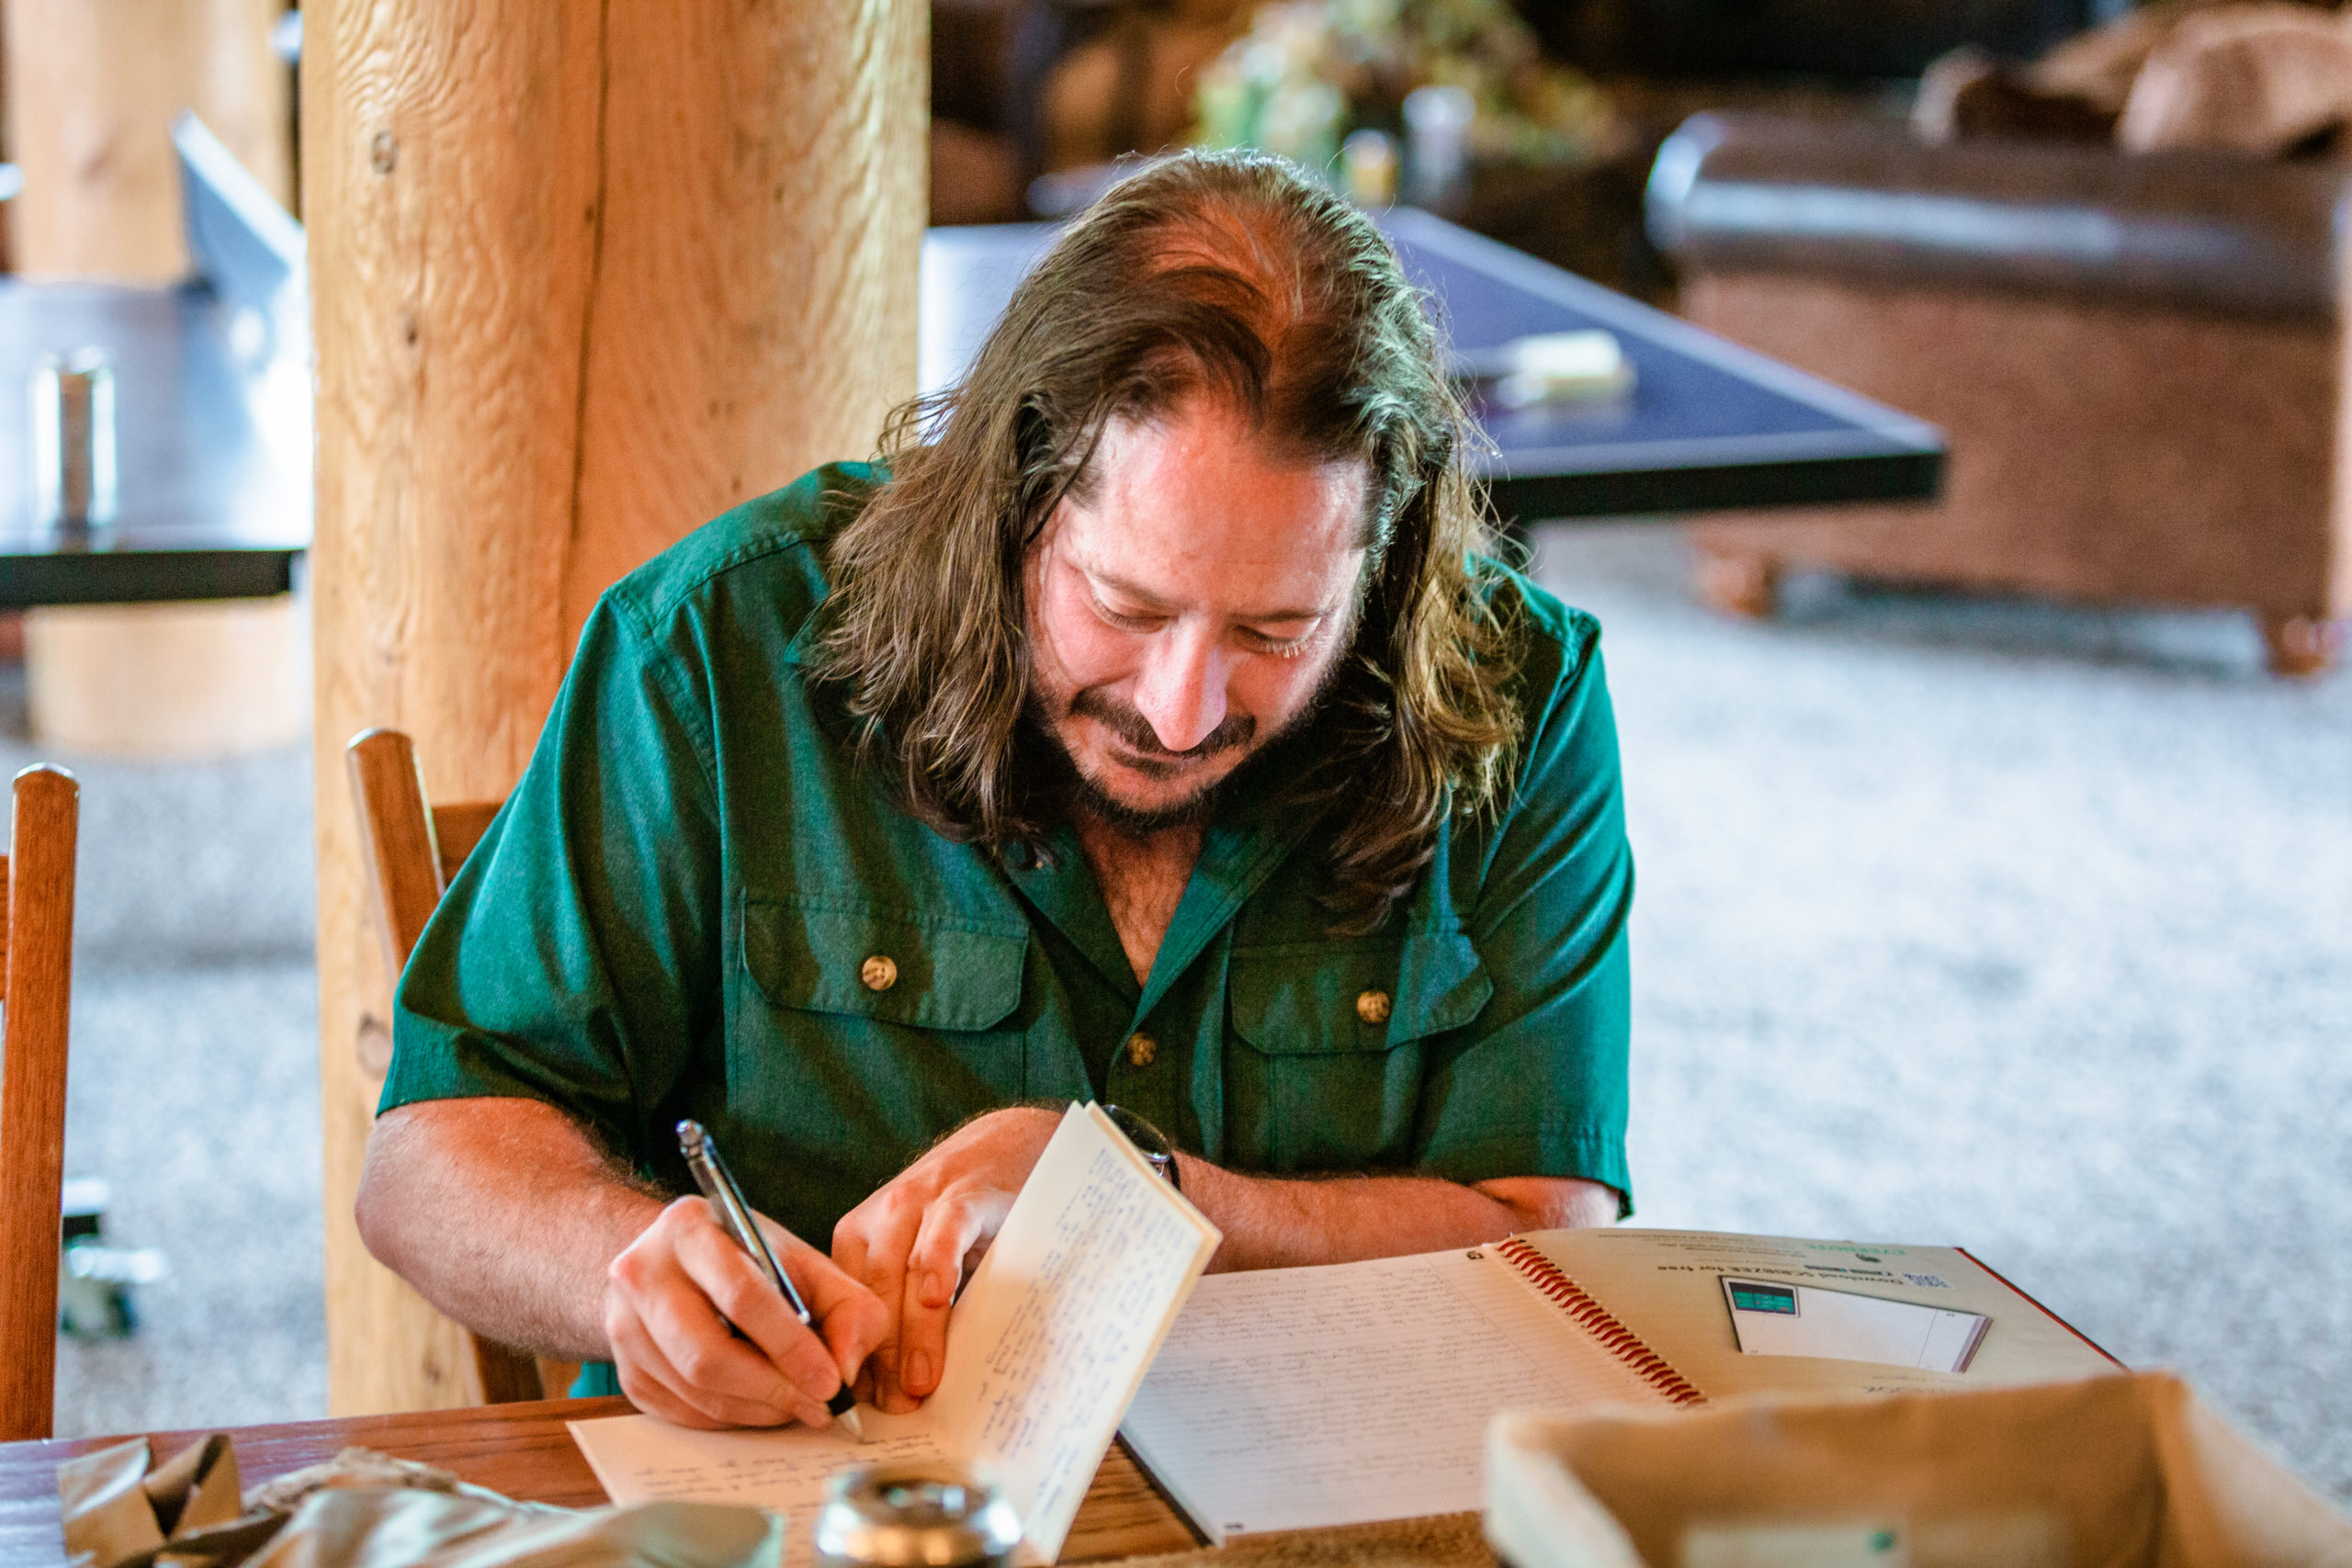 groom writing vows before labelle lake wedding while wearing a green fishing shirt